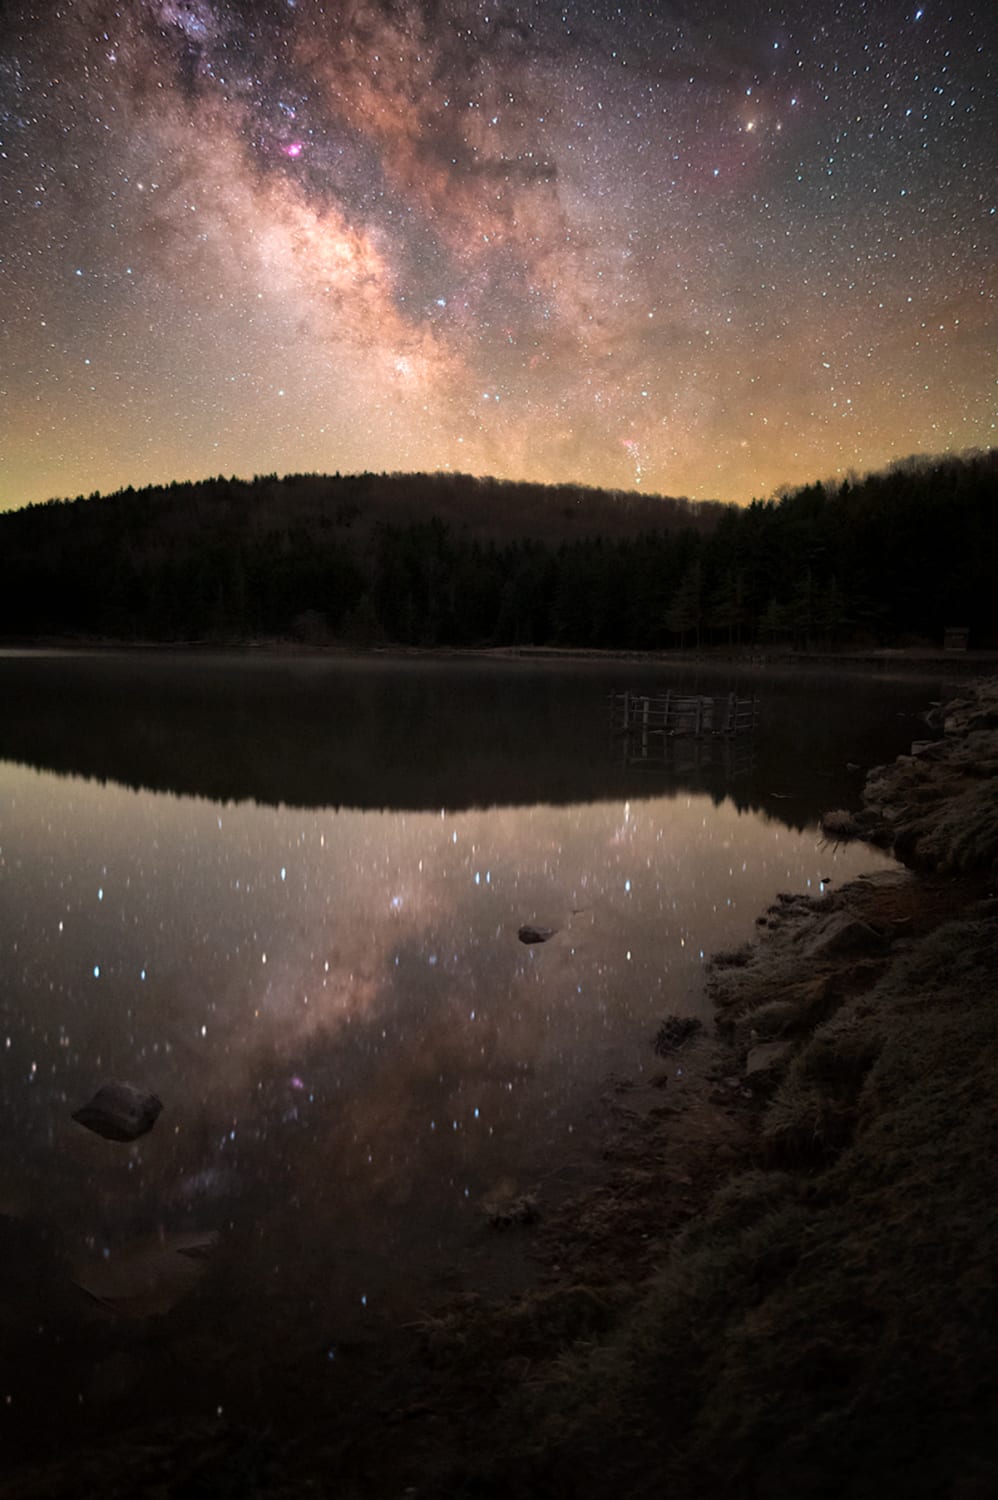 I photographed the Milky Way in front of a perfectly calm lake that reflected thousands of stars